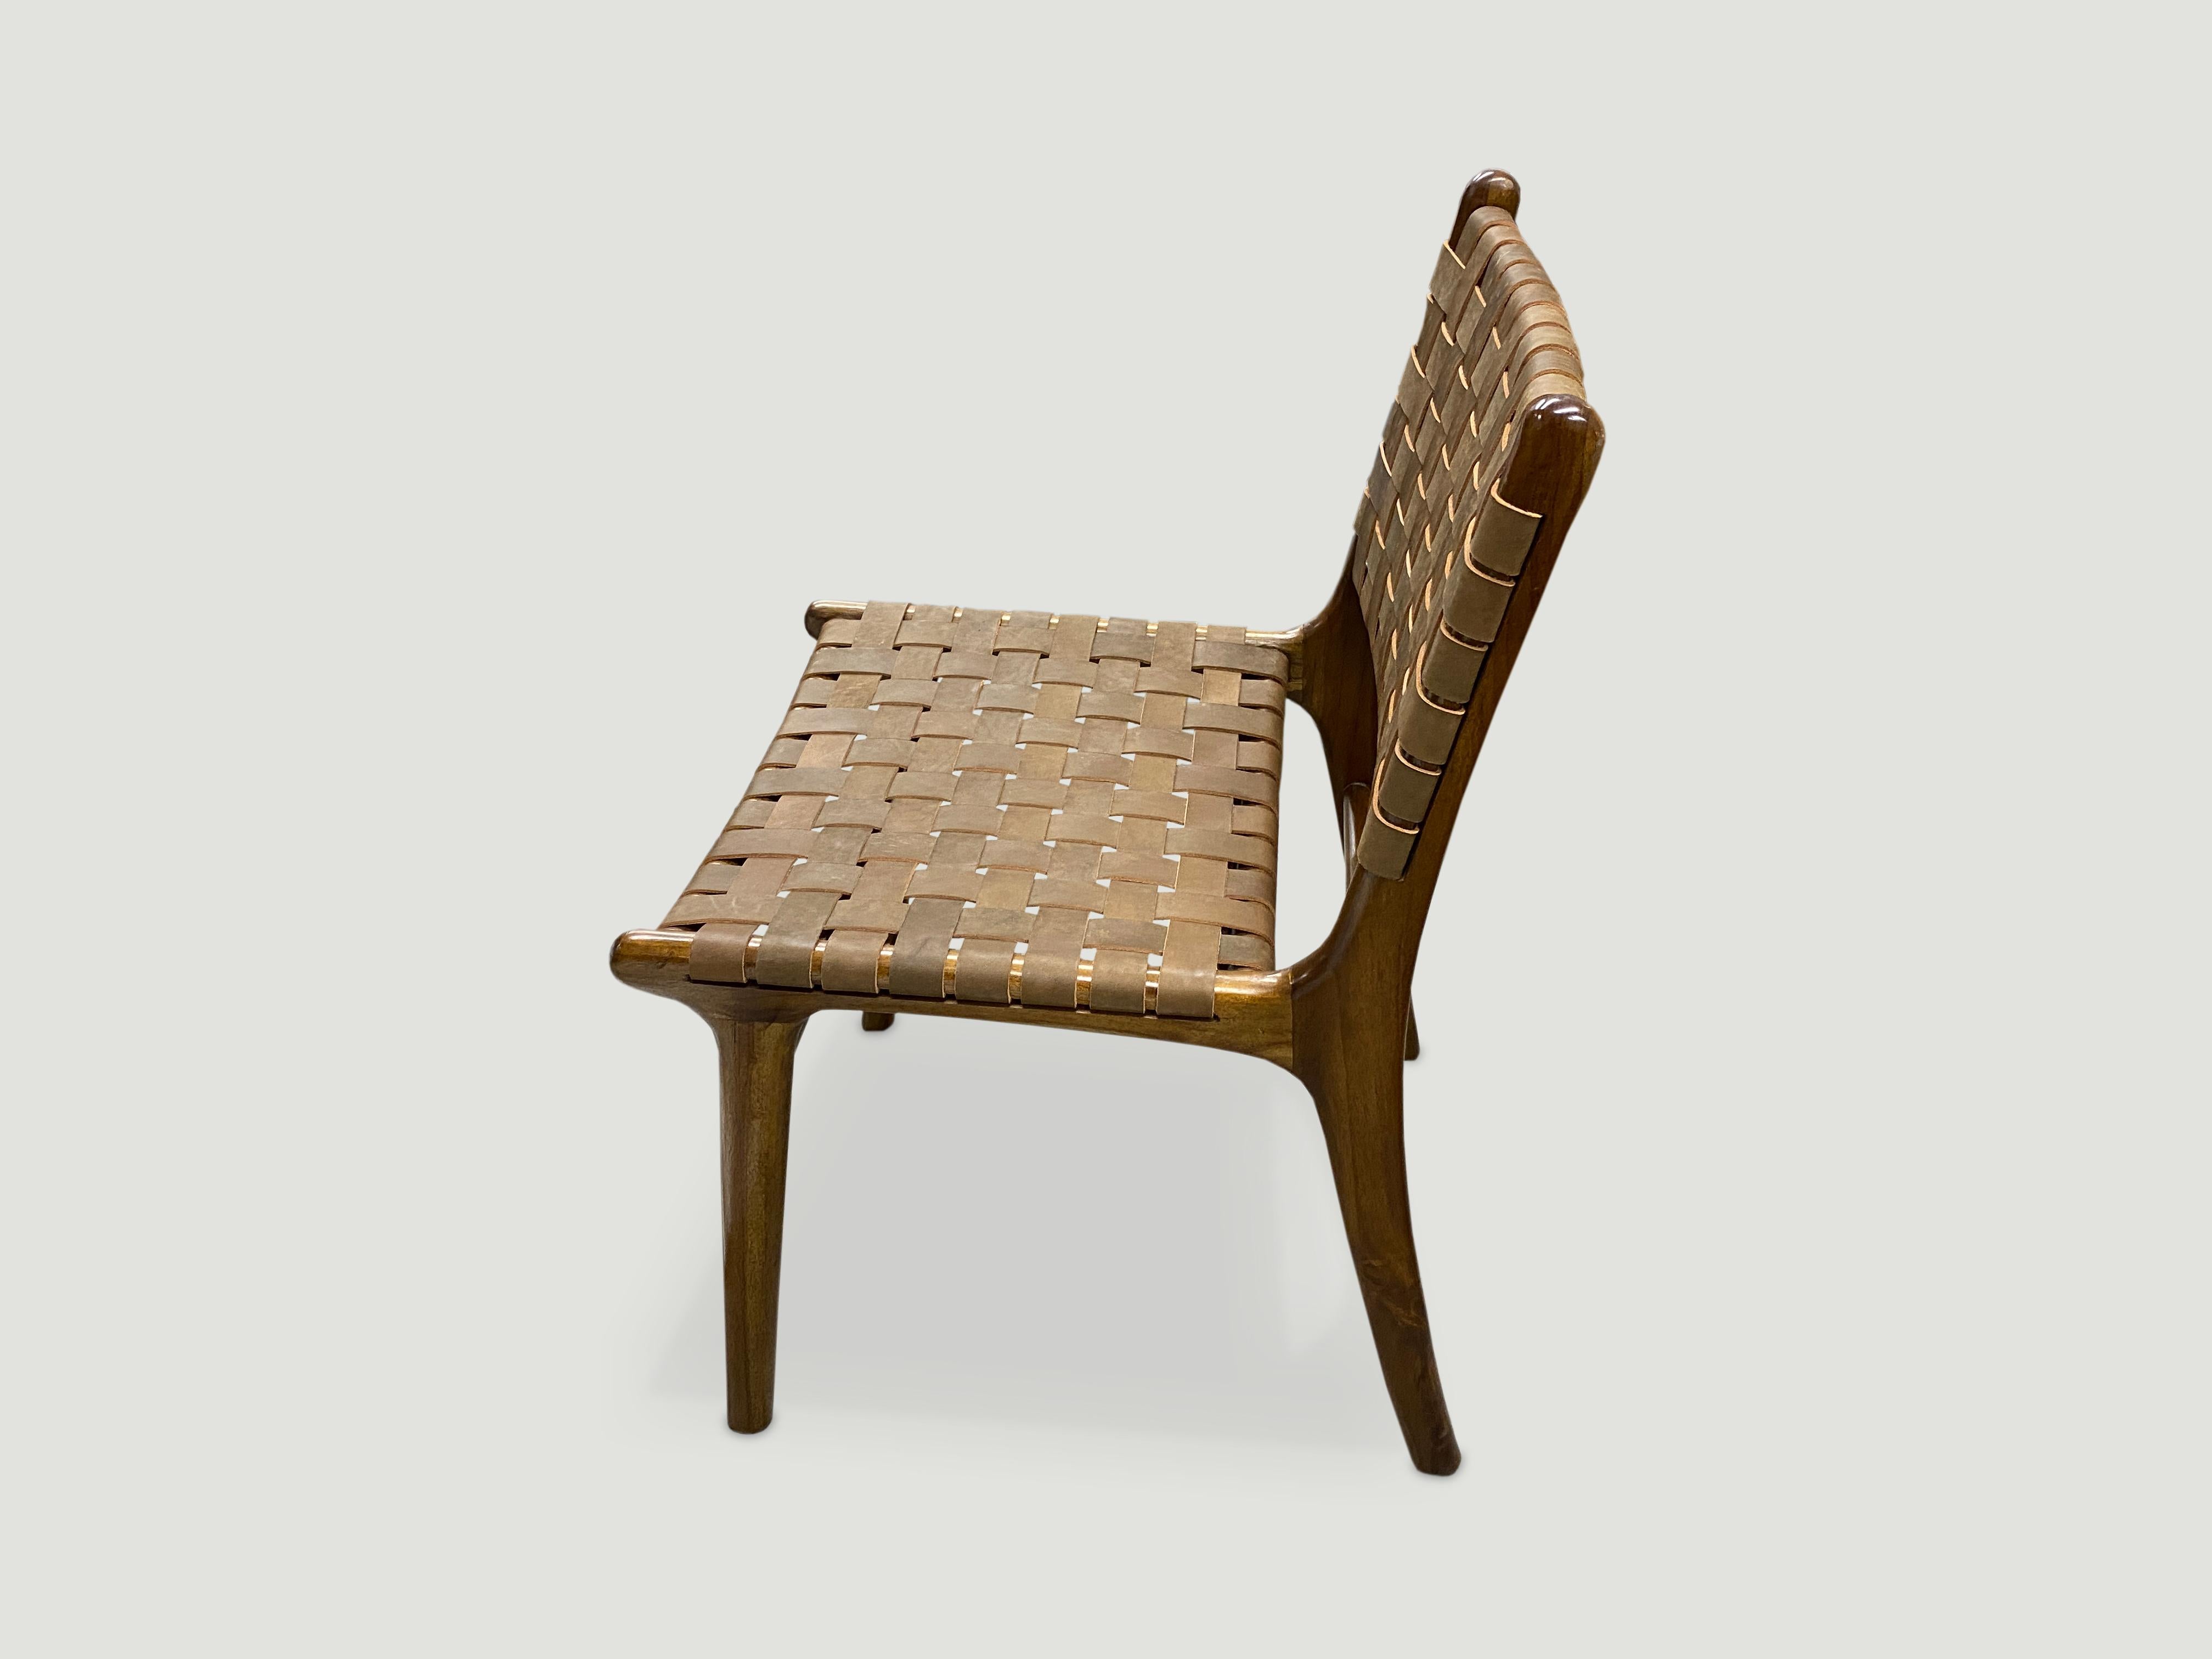 Andrianna Shamaris Modern Chair Series Single Backed Leather Woven Chair In Excellent Condition For Sale In New York, NY